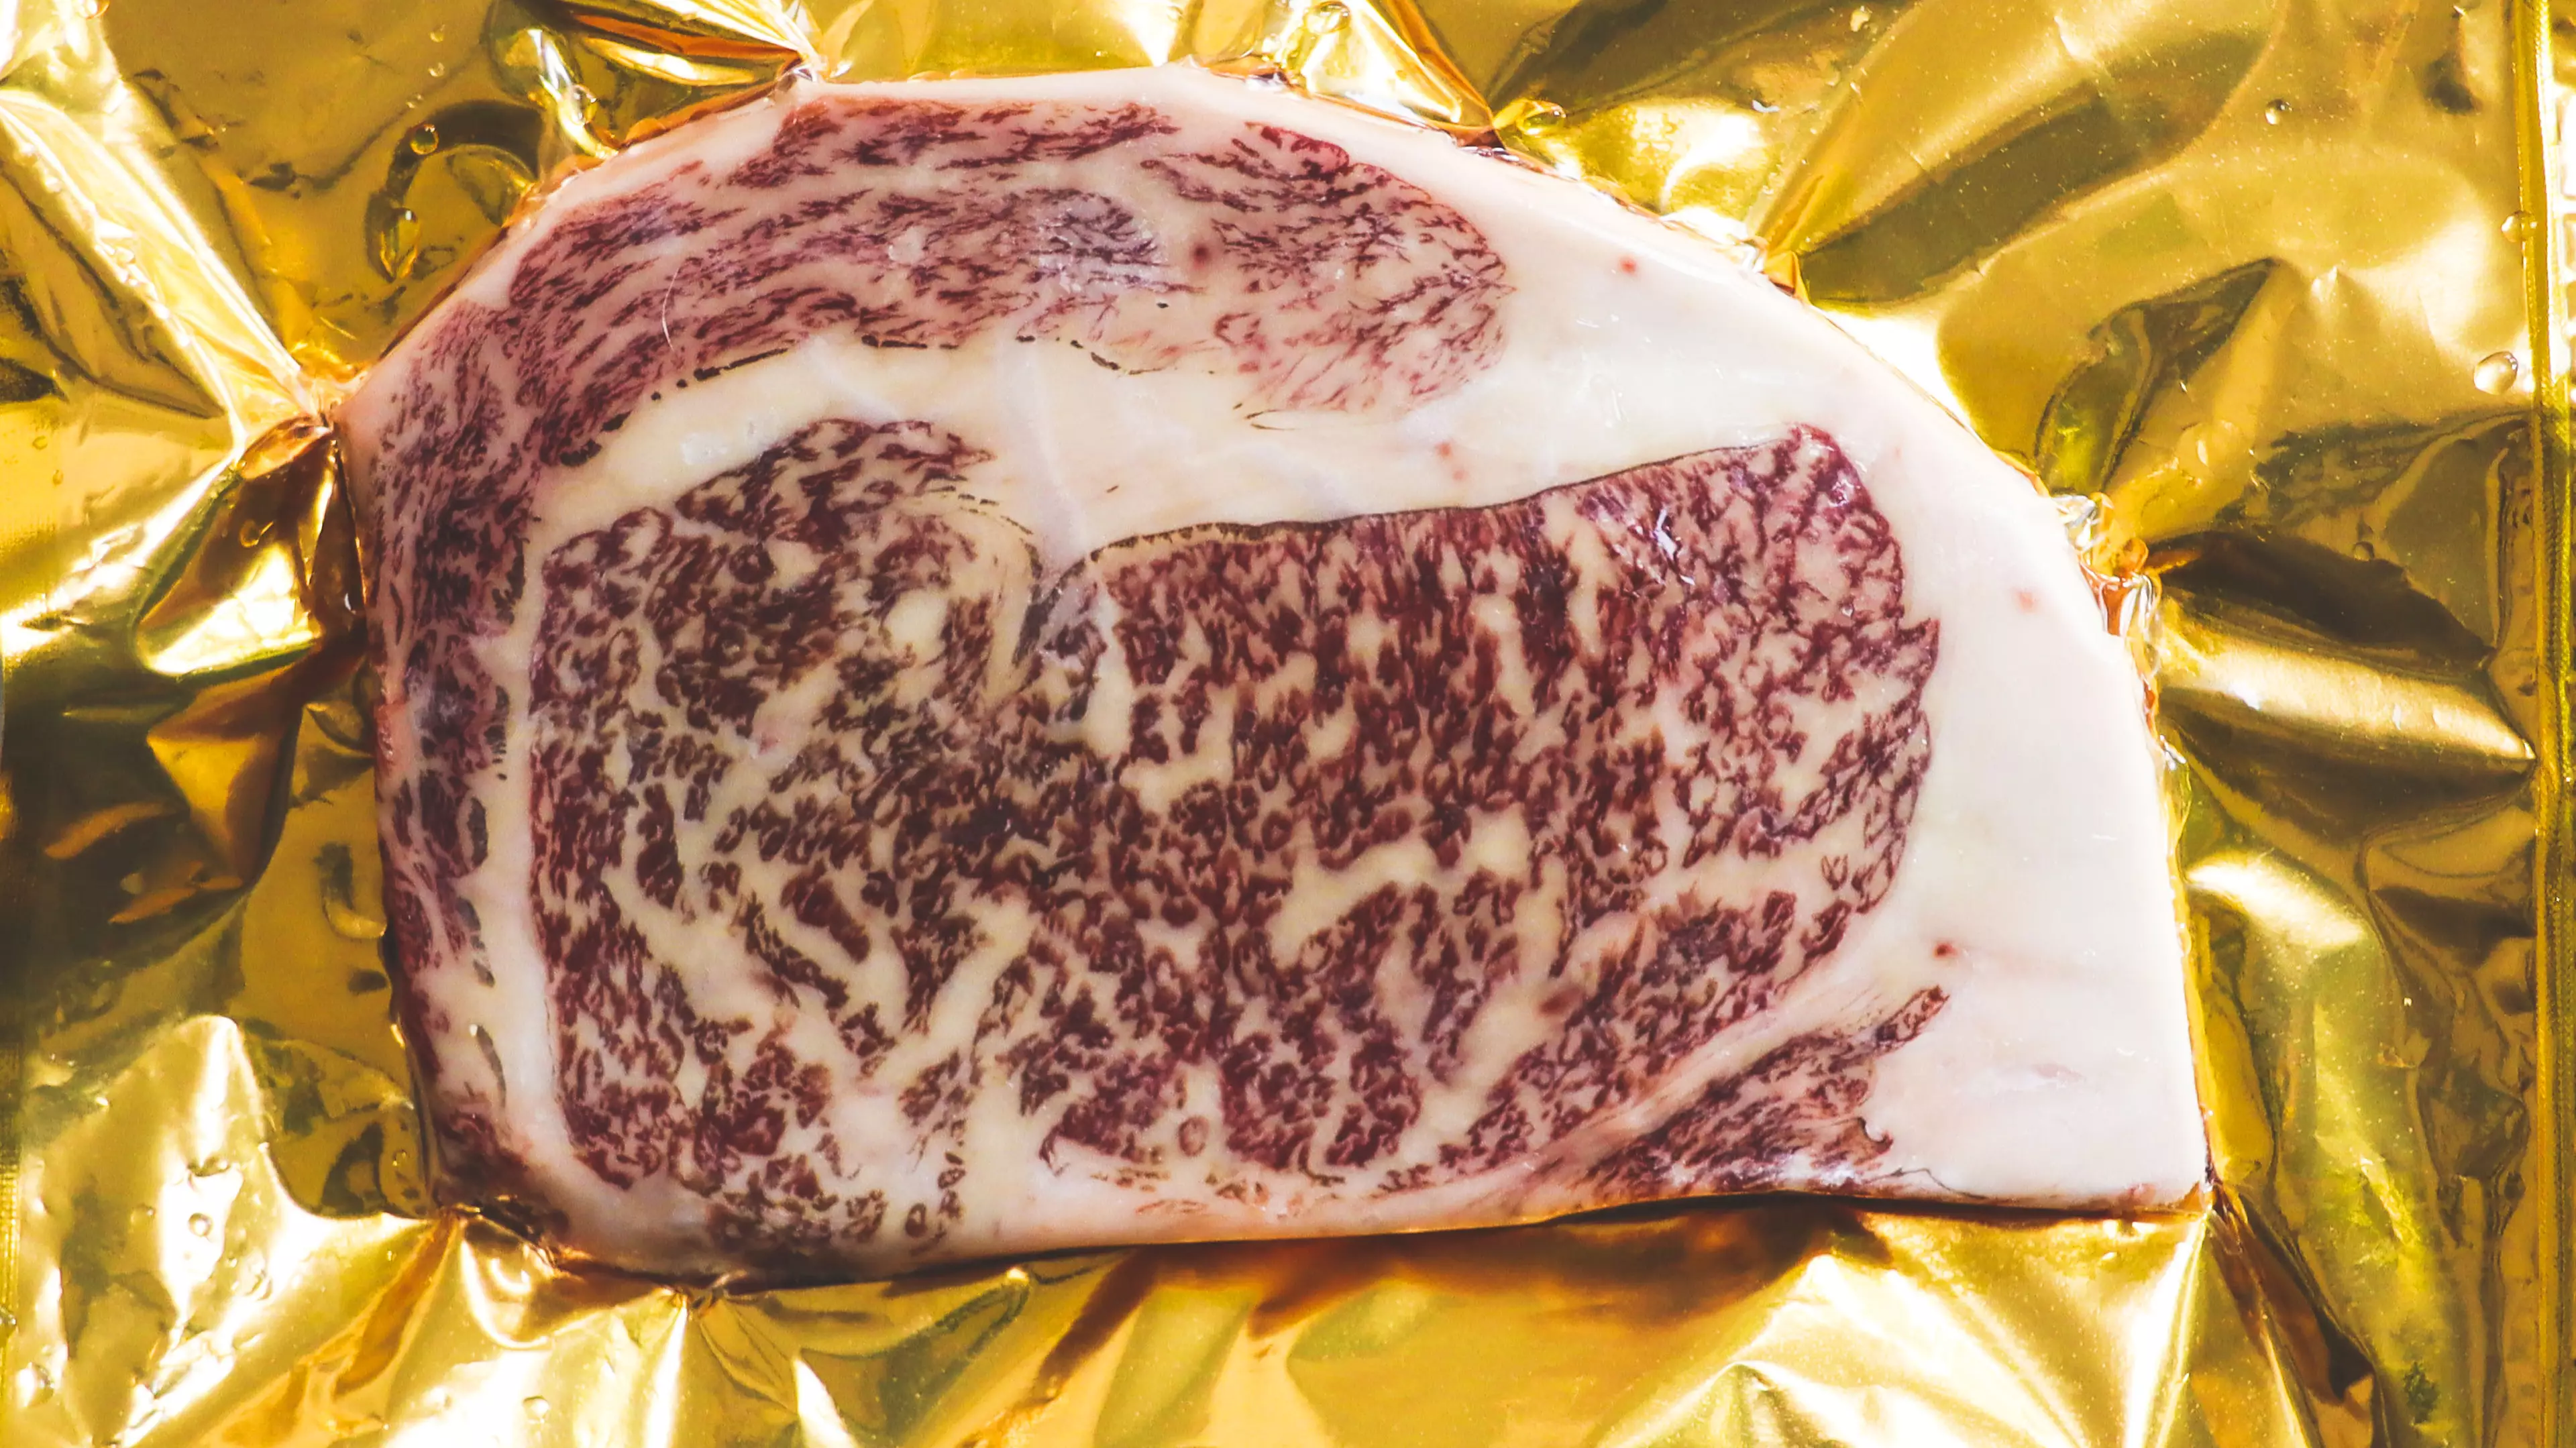 Most Expensive Ribeye Ever Sold In Britain Is Made From Beer-Drinking Cows